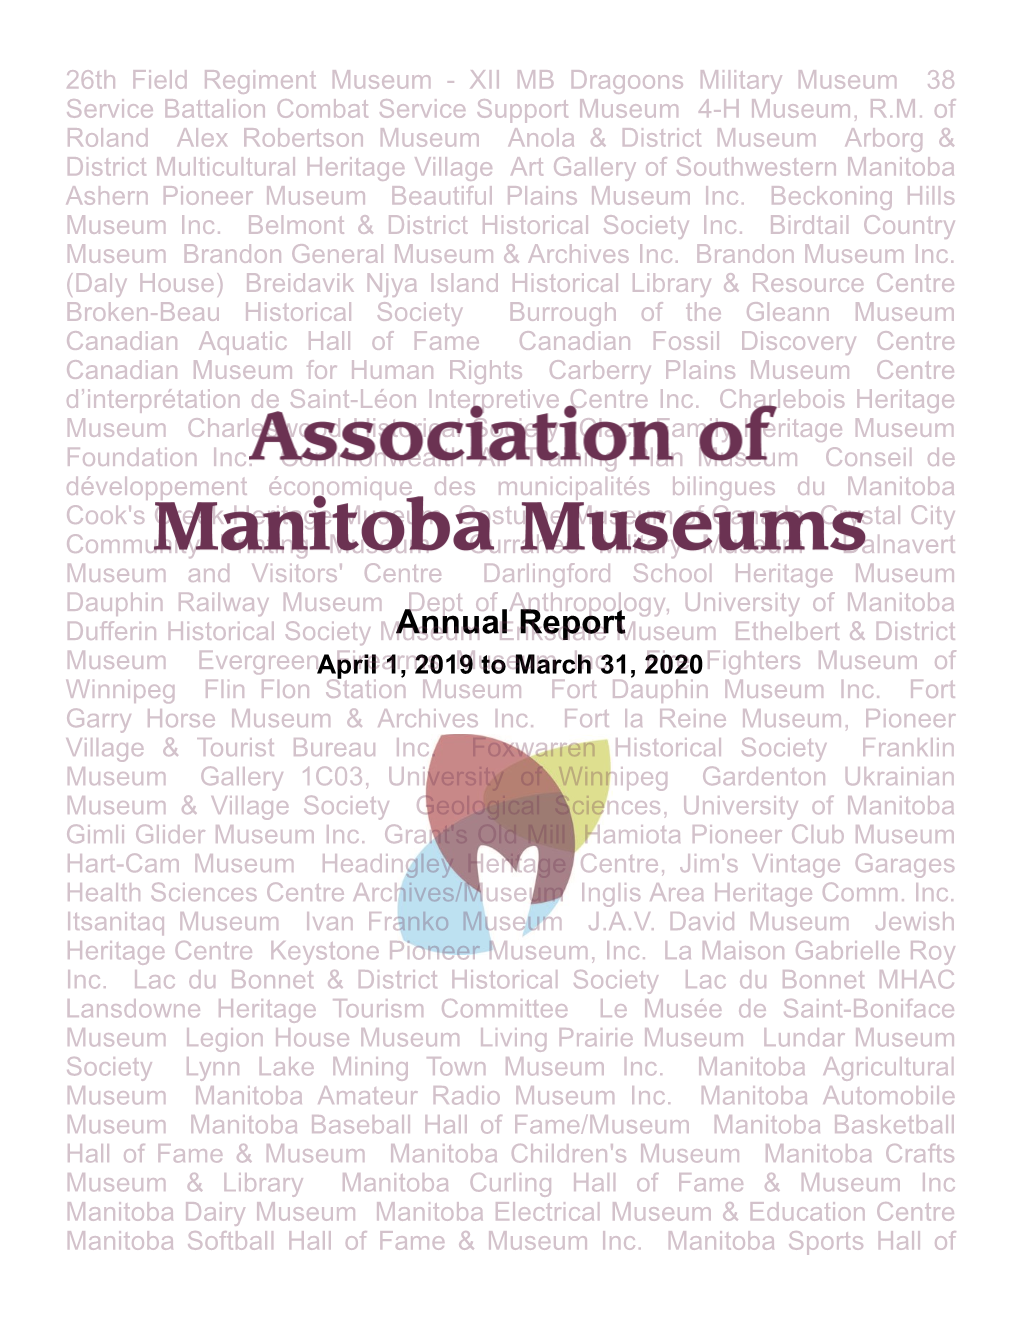 Annual Report April 1, 2019 to March 31, 2020